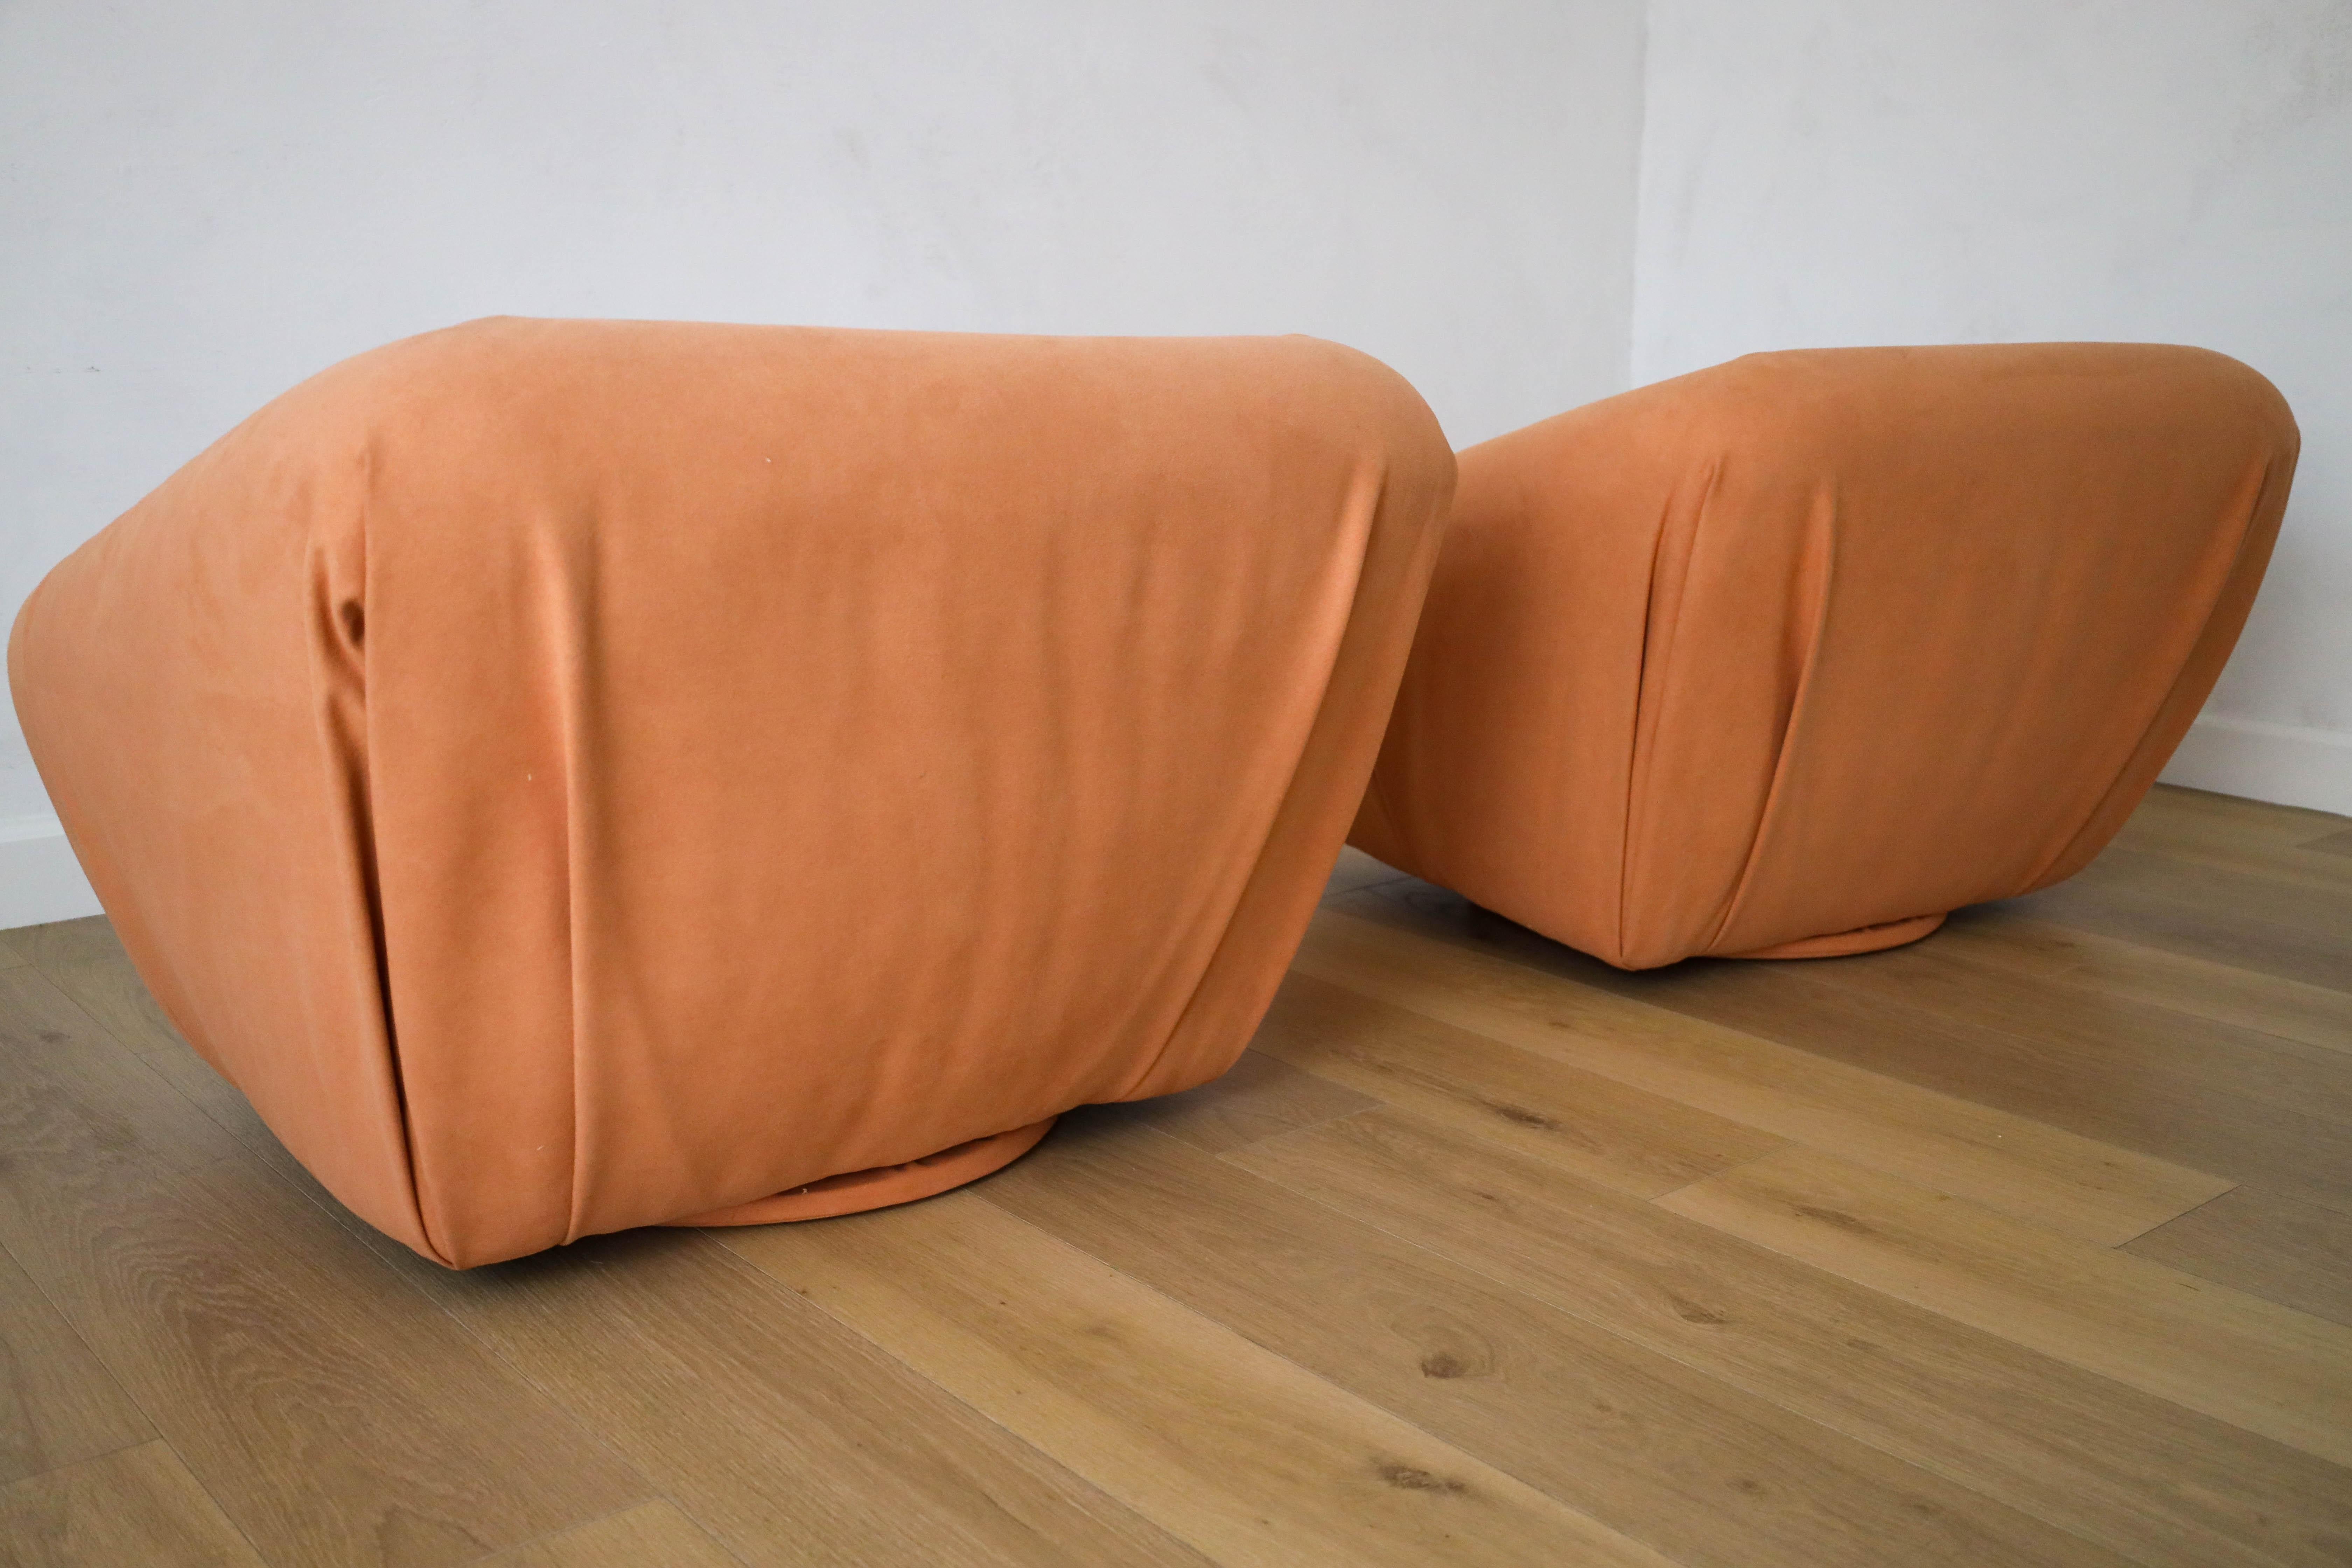 Vintage Pair 1950s European Swivel Chairs, Suede upholstery by The Romo Group For Sale 1